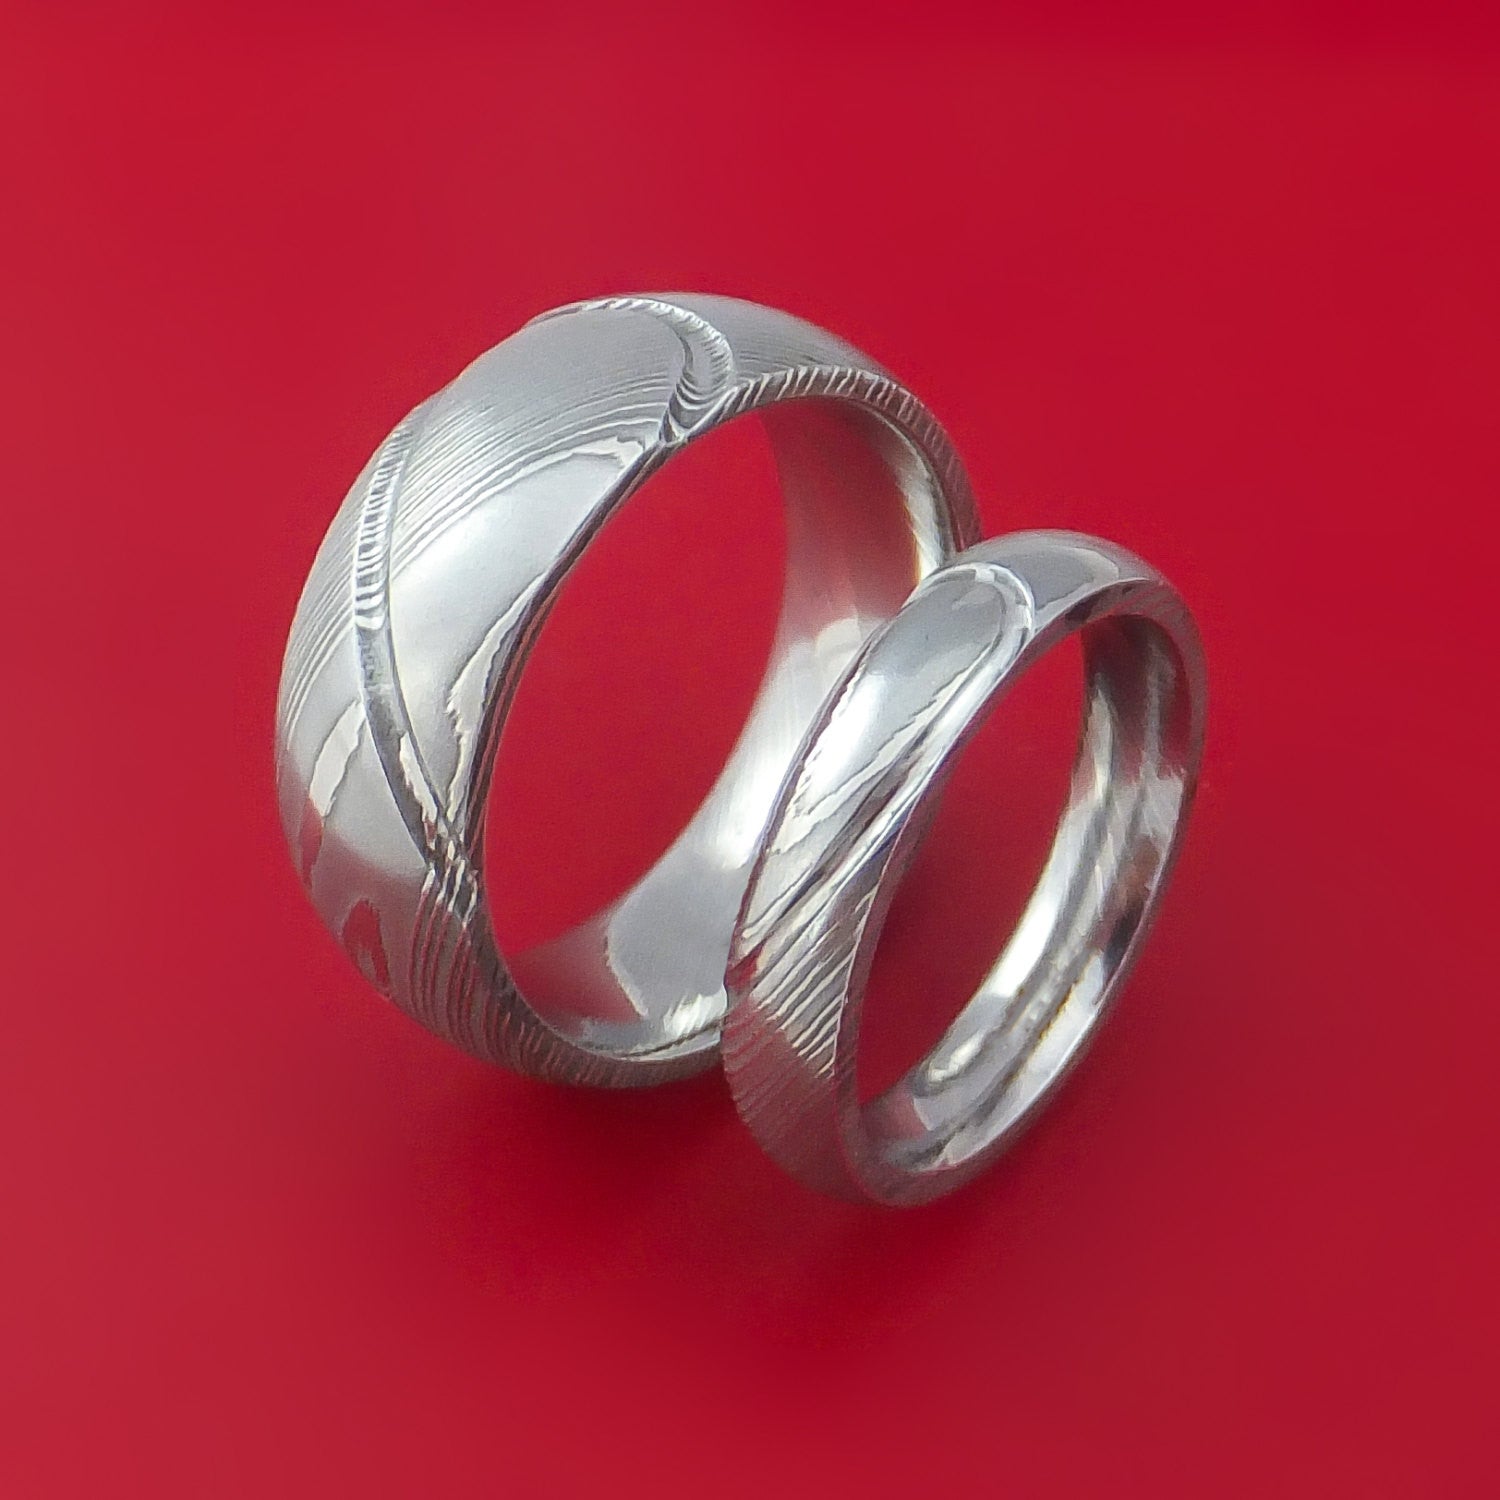 Matching Damascus Steel Heart Carved Ring Set Wedding